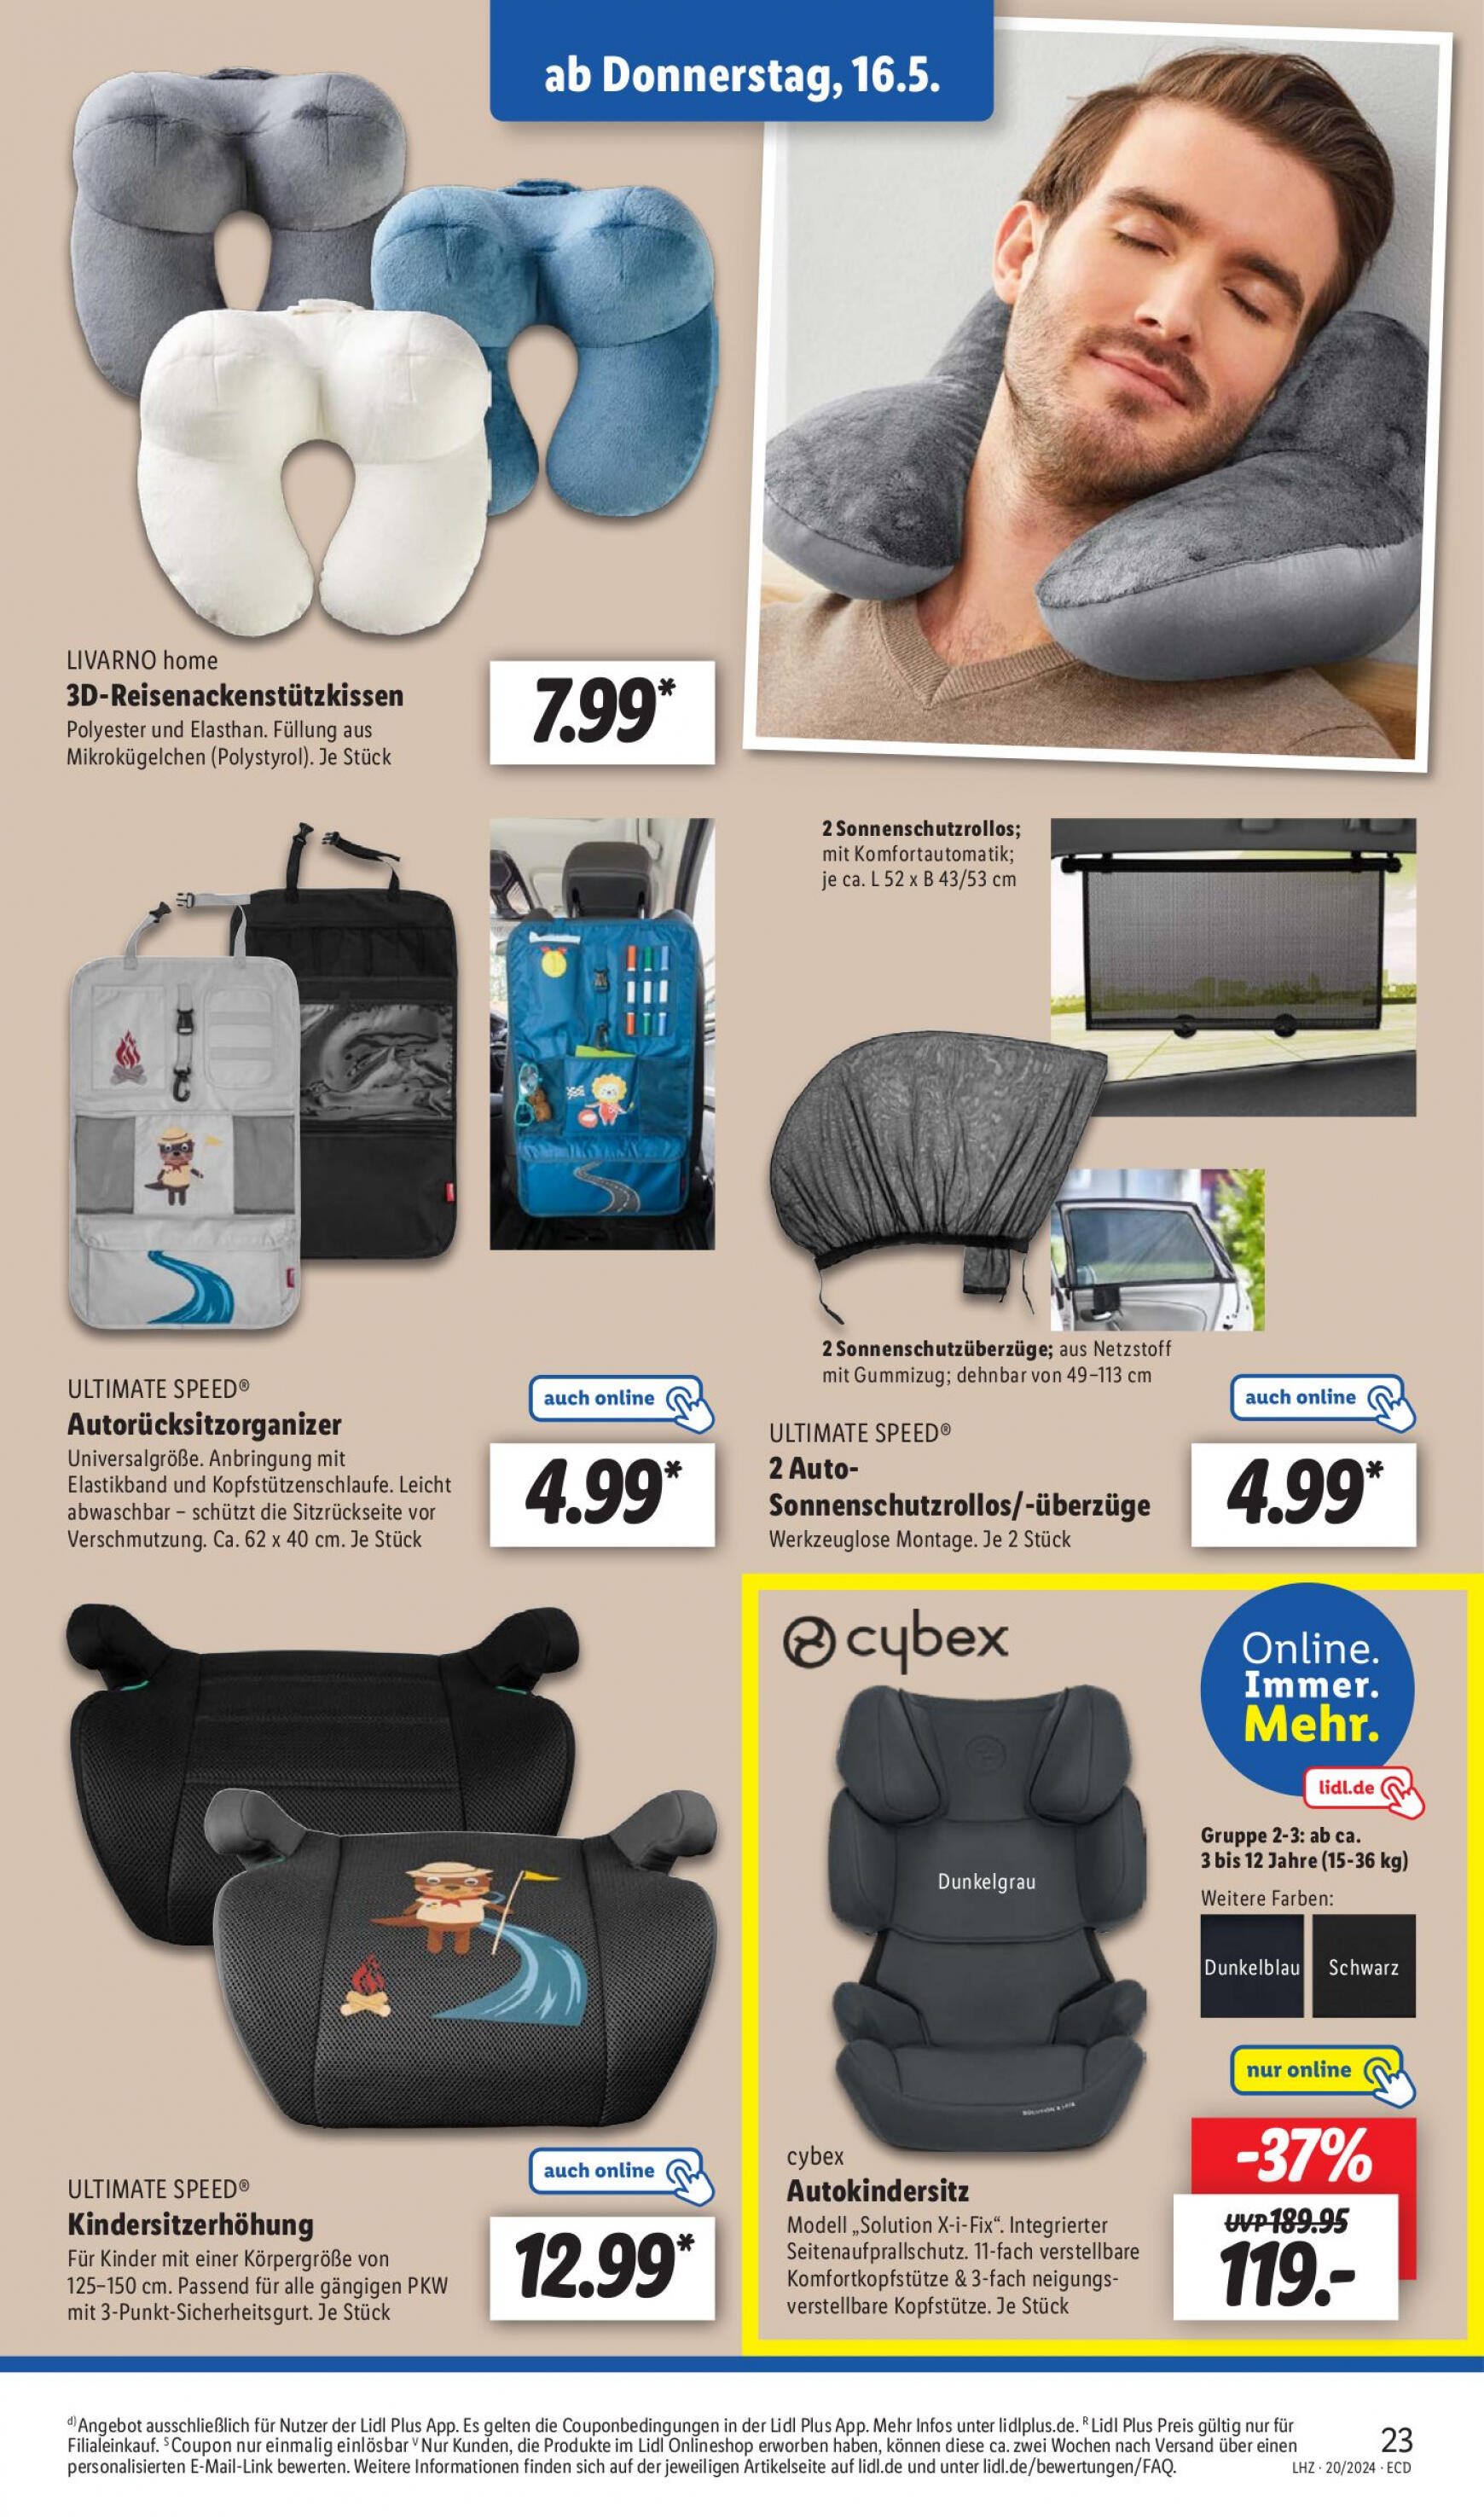 lidl - Flyer Lidl aktuell 13.05. - 18.05. - page: 27